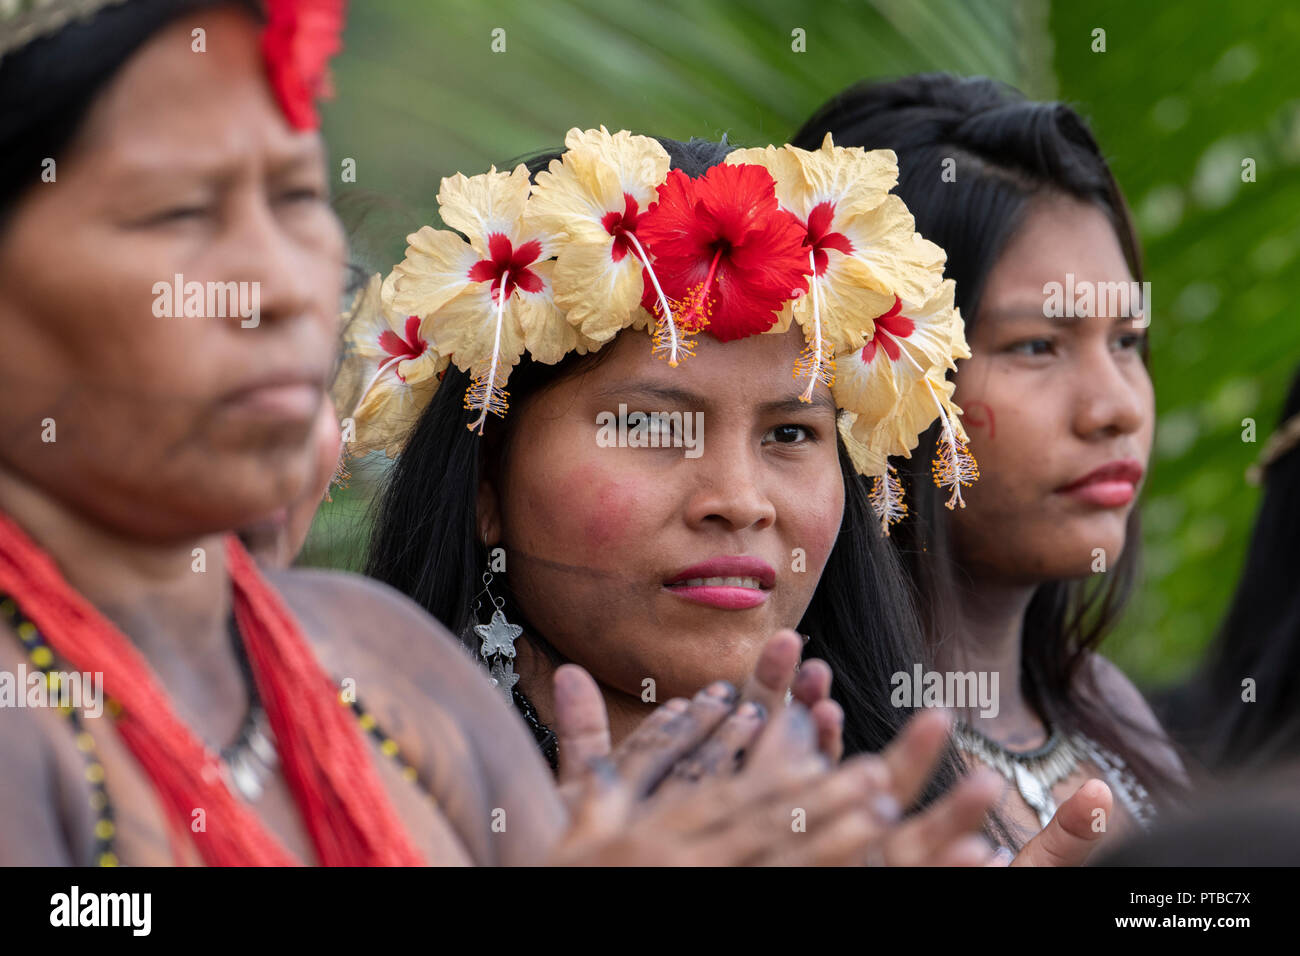 Central America, Panama, Gatun Lake. Embera Indian village. Typical village woman with tattoos and flowers in their hair. Stock Photo